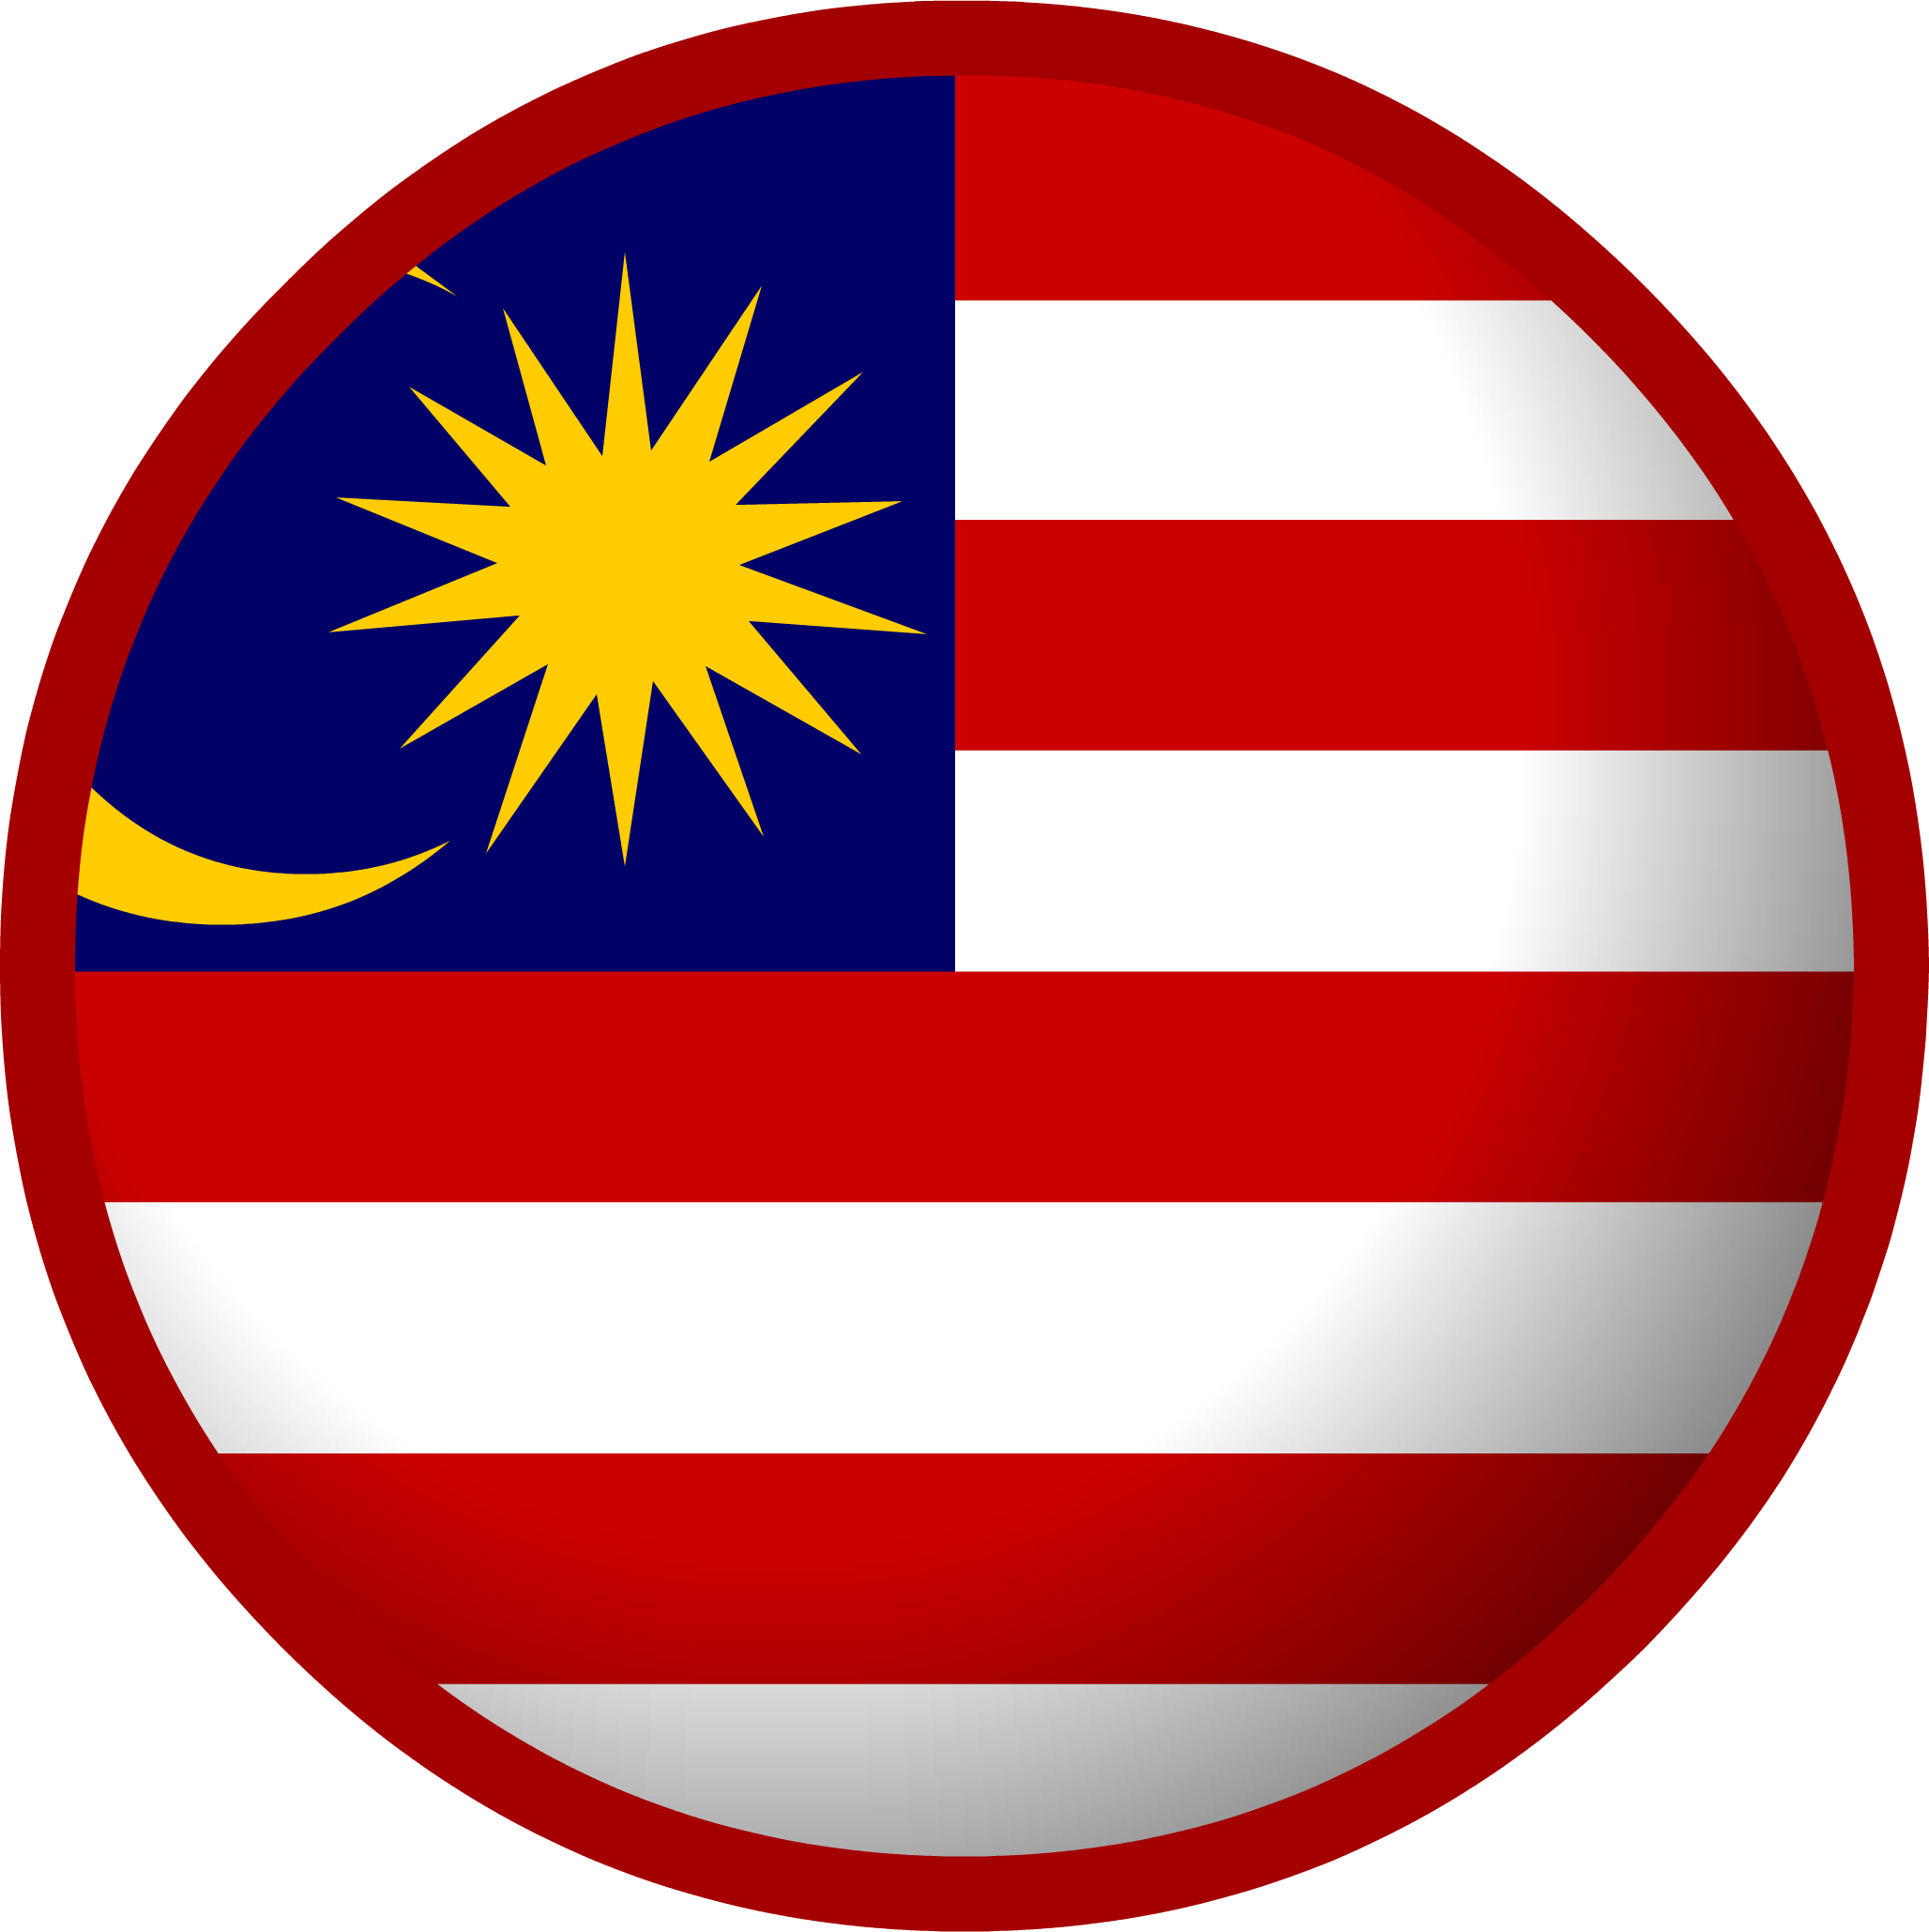 A Red White And Blue Flag With A Yellow Star And A Yellow Sun